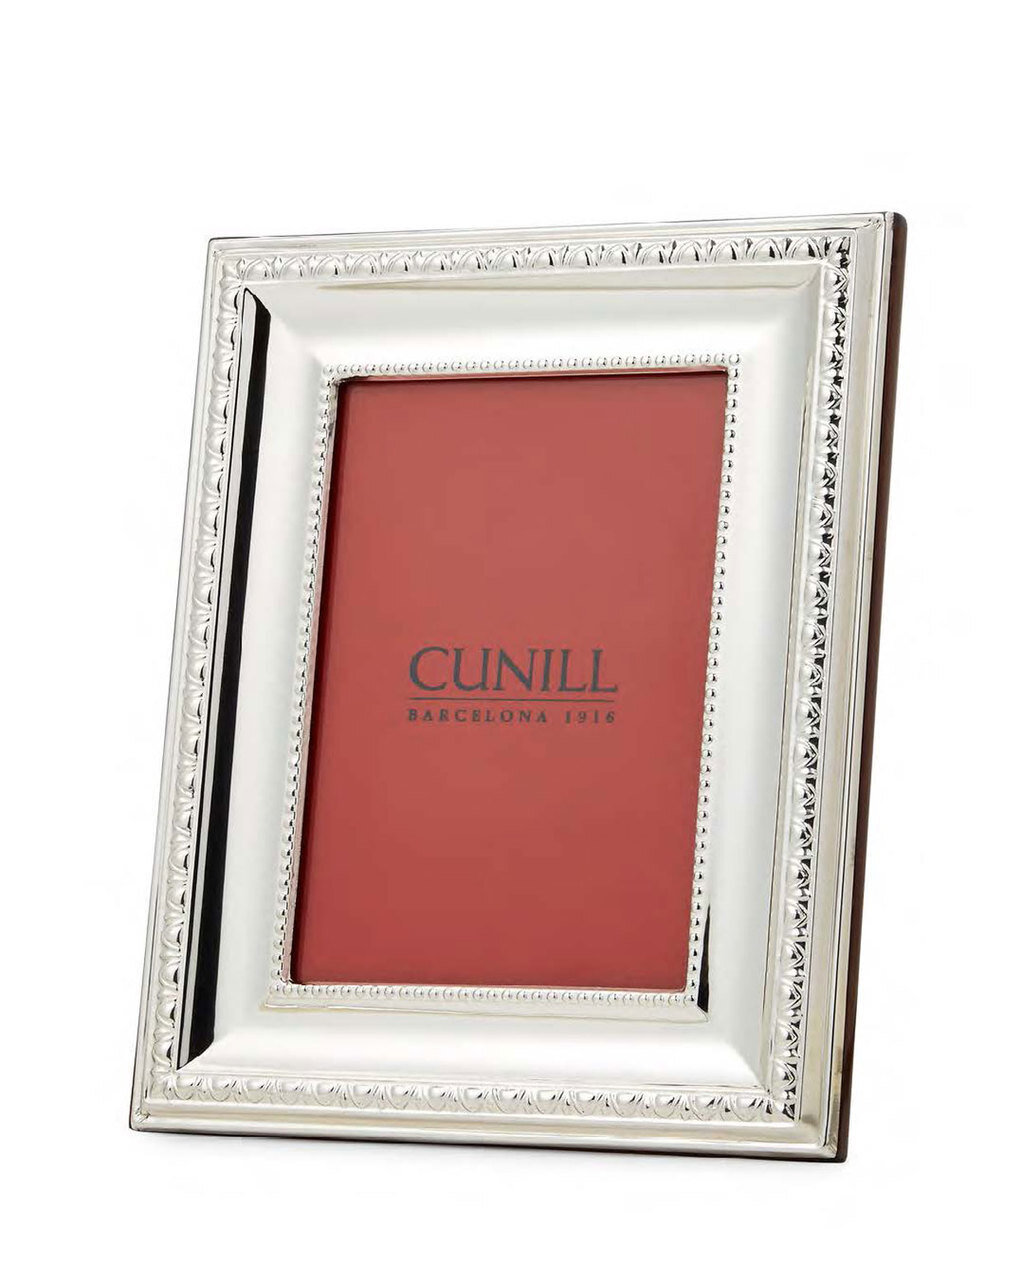 Cunill Prestige 8 x 10 Inch Picture Frame - Sterling Silver